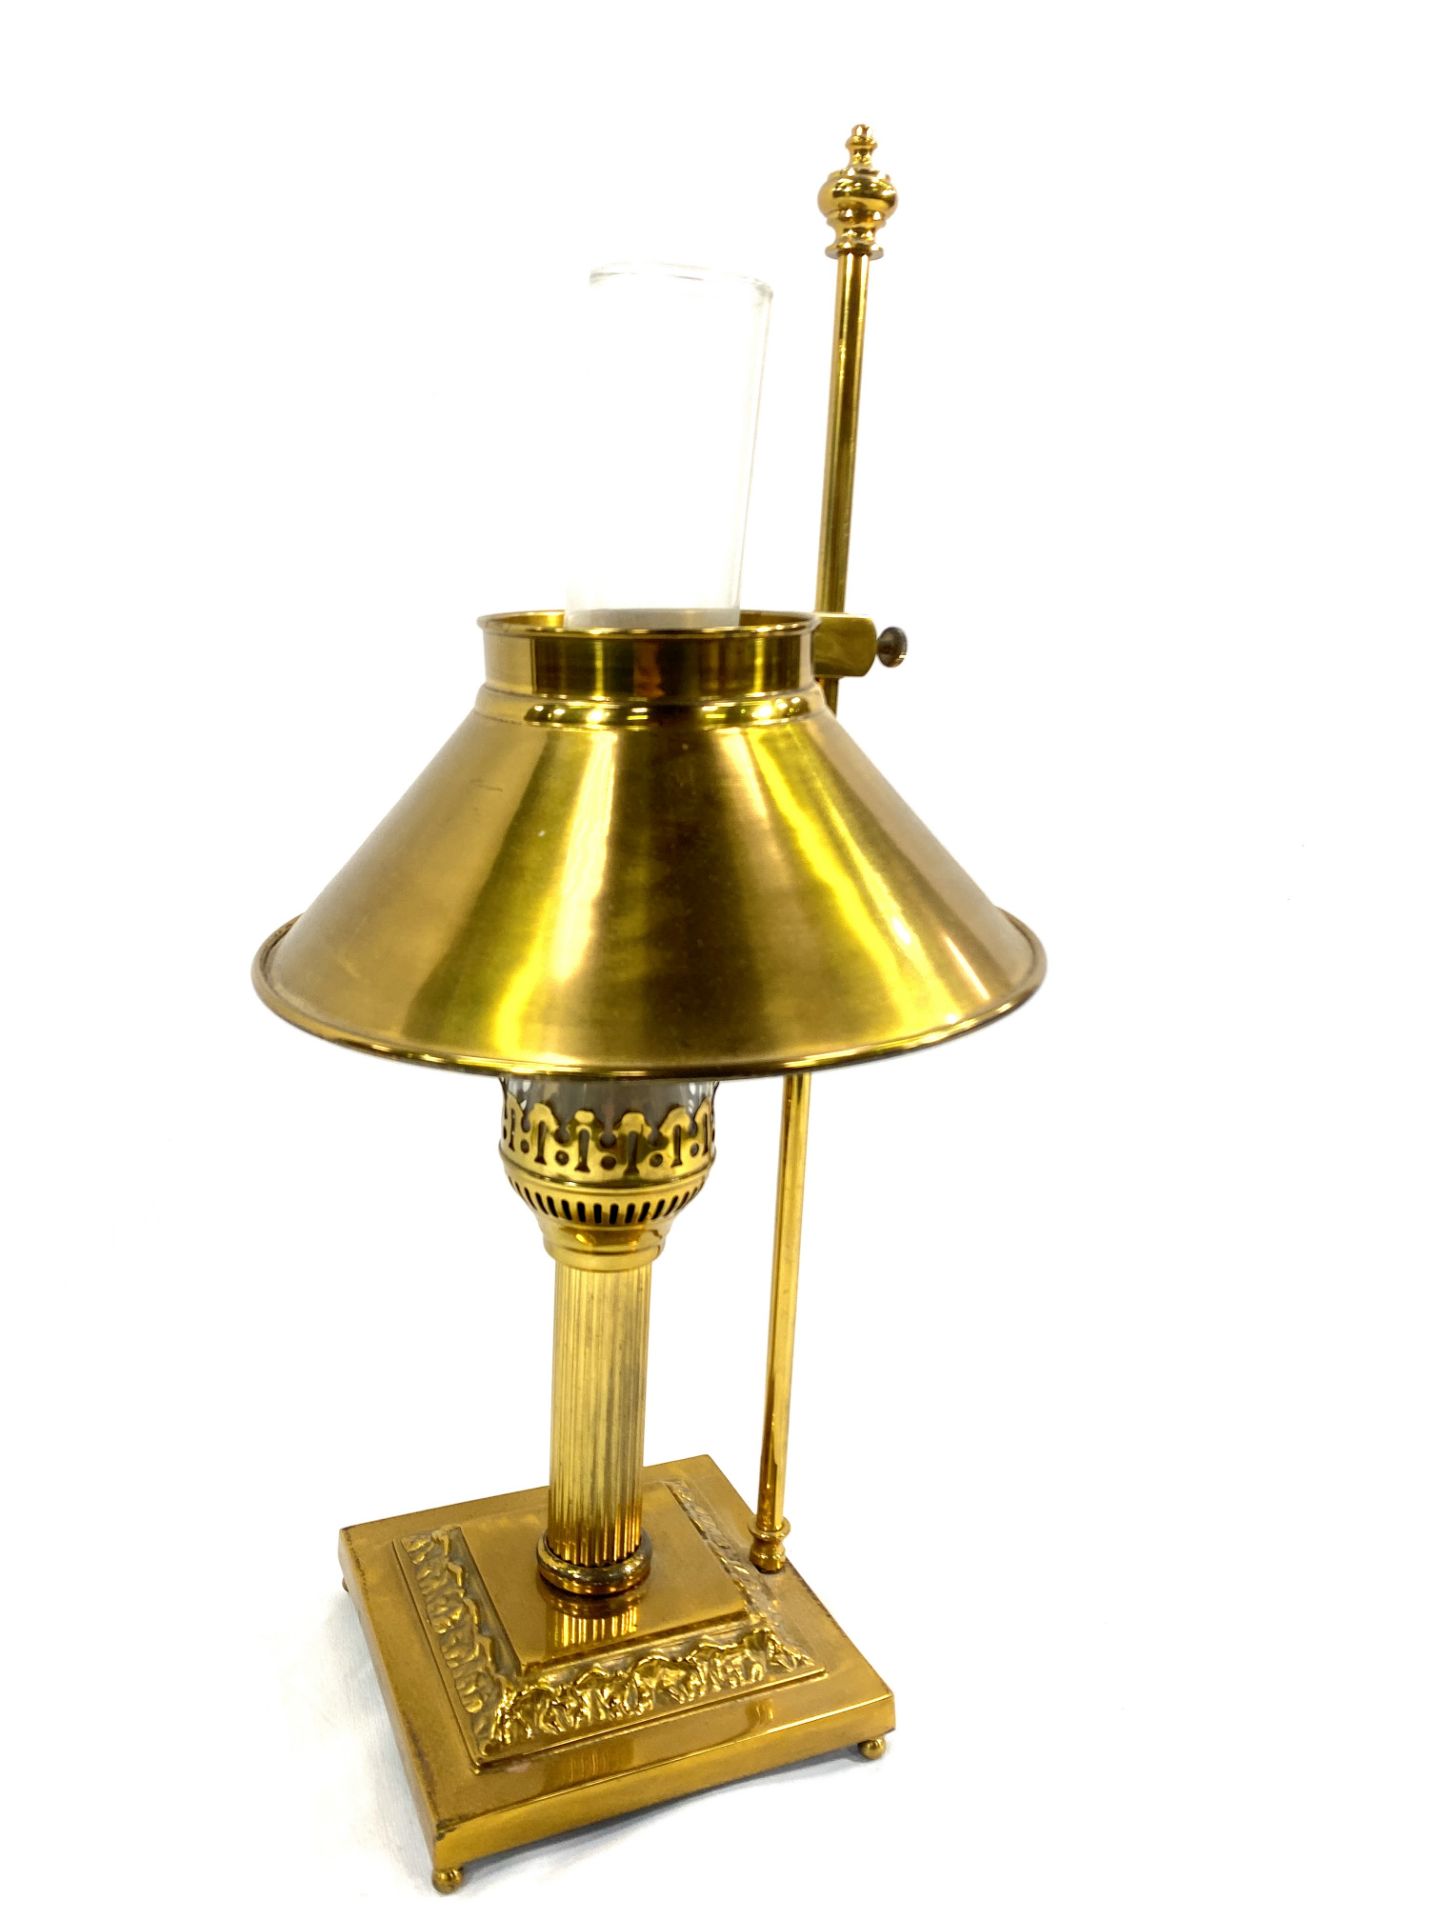 Brass table lamp in the style of a gas lamp - Bild 2 aus 3